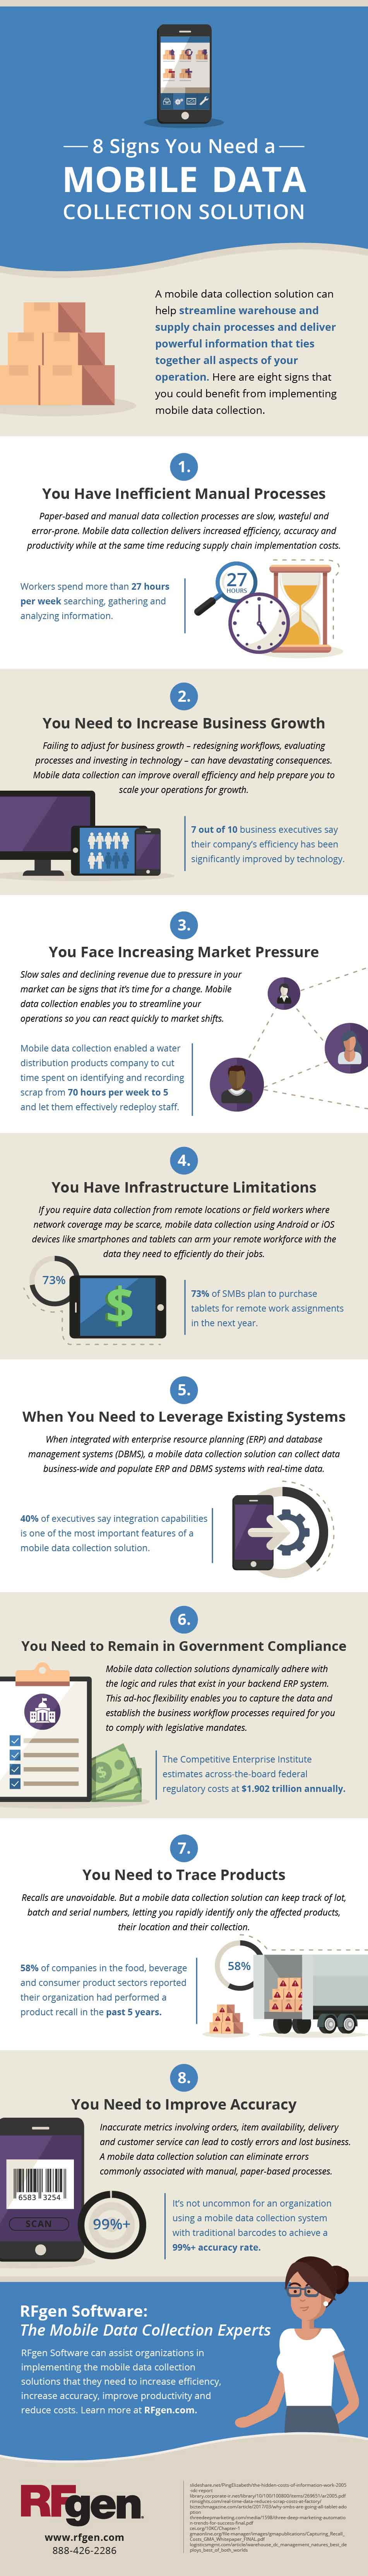 Infographic 8 Signs You Need a Mobile Data Collection Solution